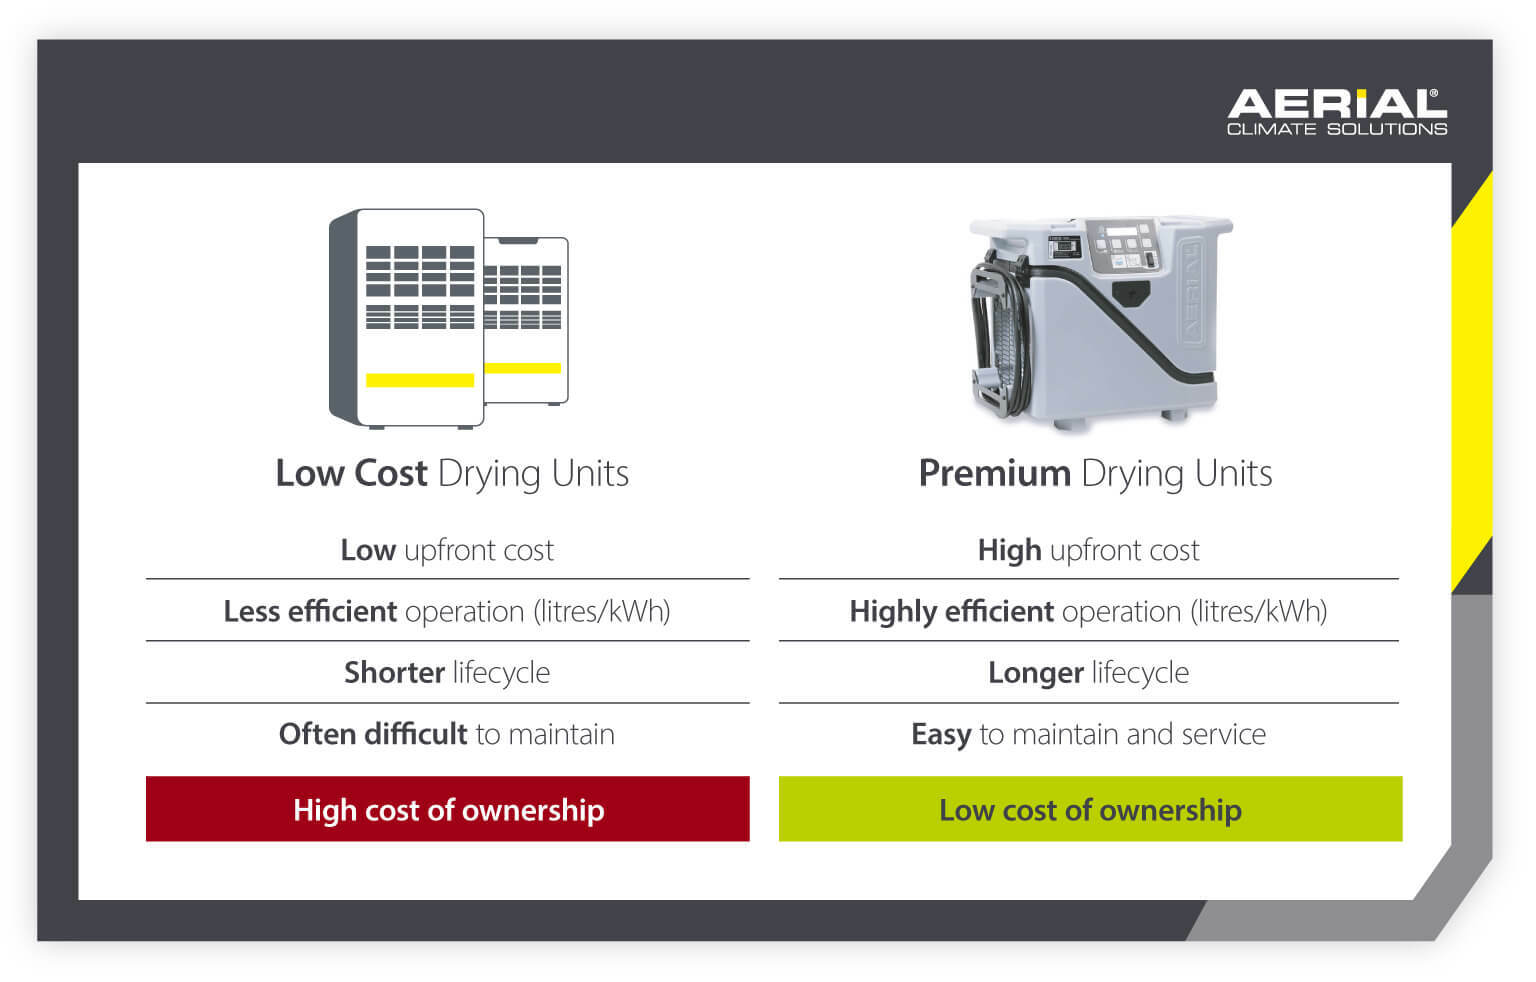 Product comparison for water damage drying equipment by Aerial Climate Solutions - low cost vs premium dying units - Infographic image